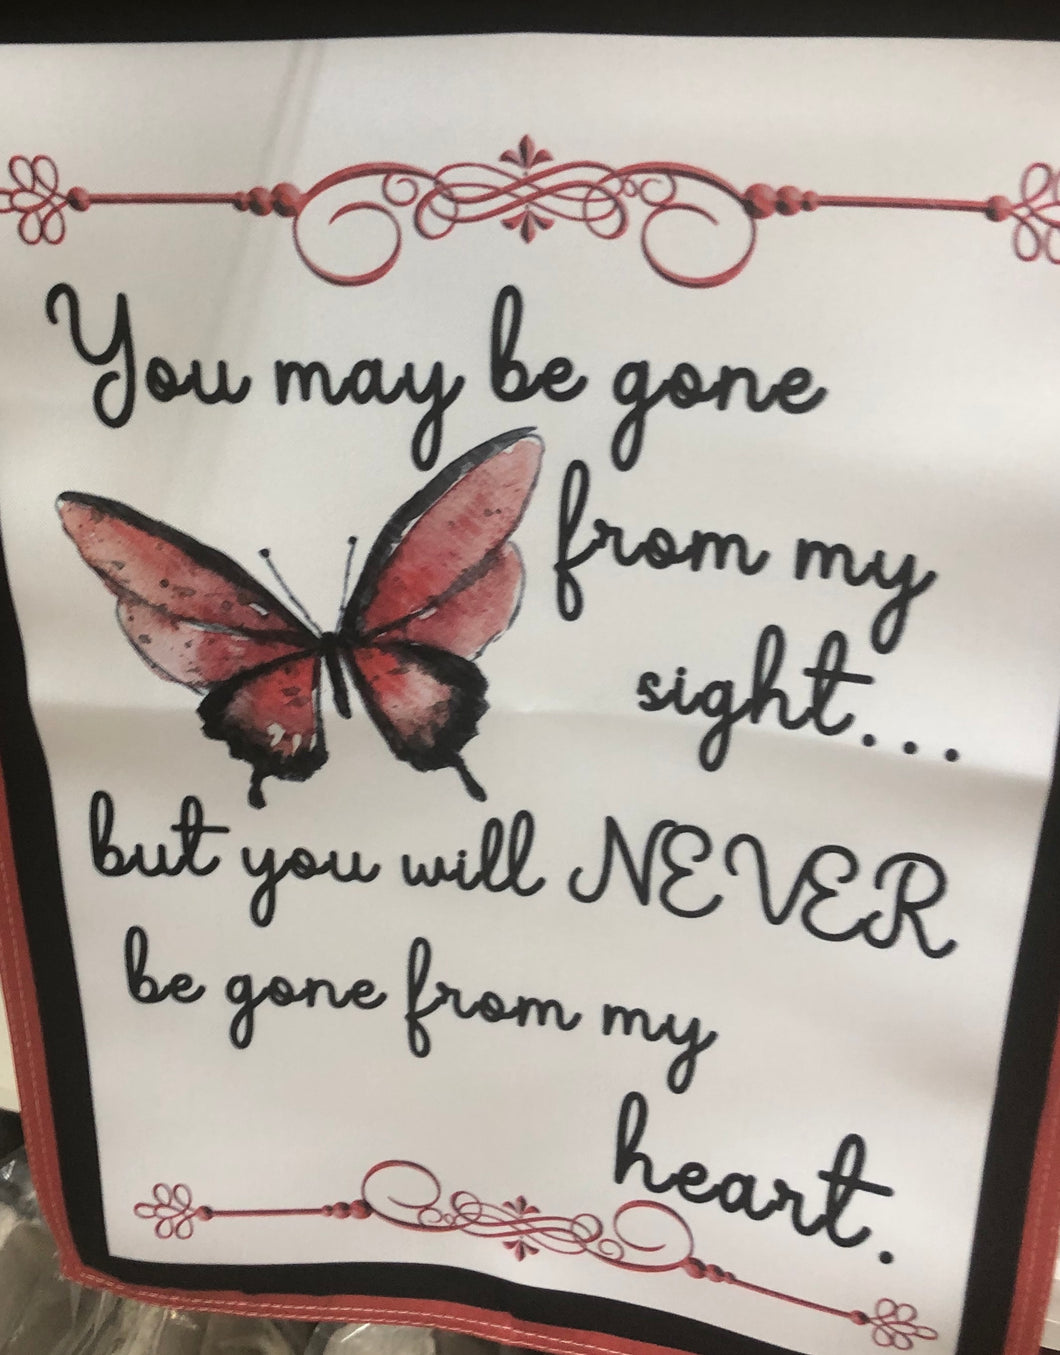 Bereavement Gifts and Quilts You may be gone from sight